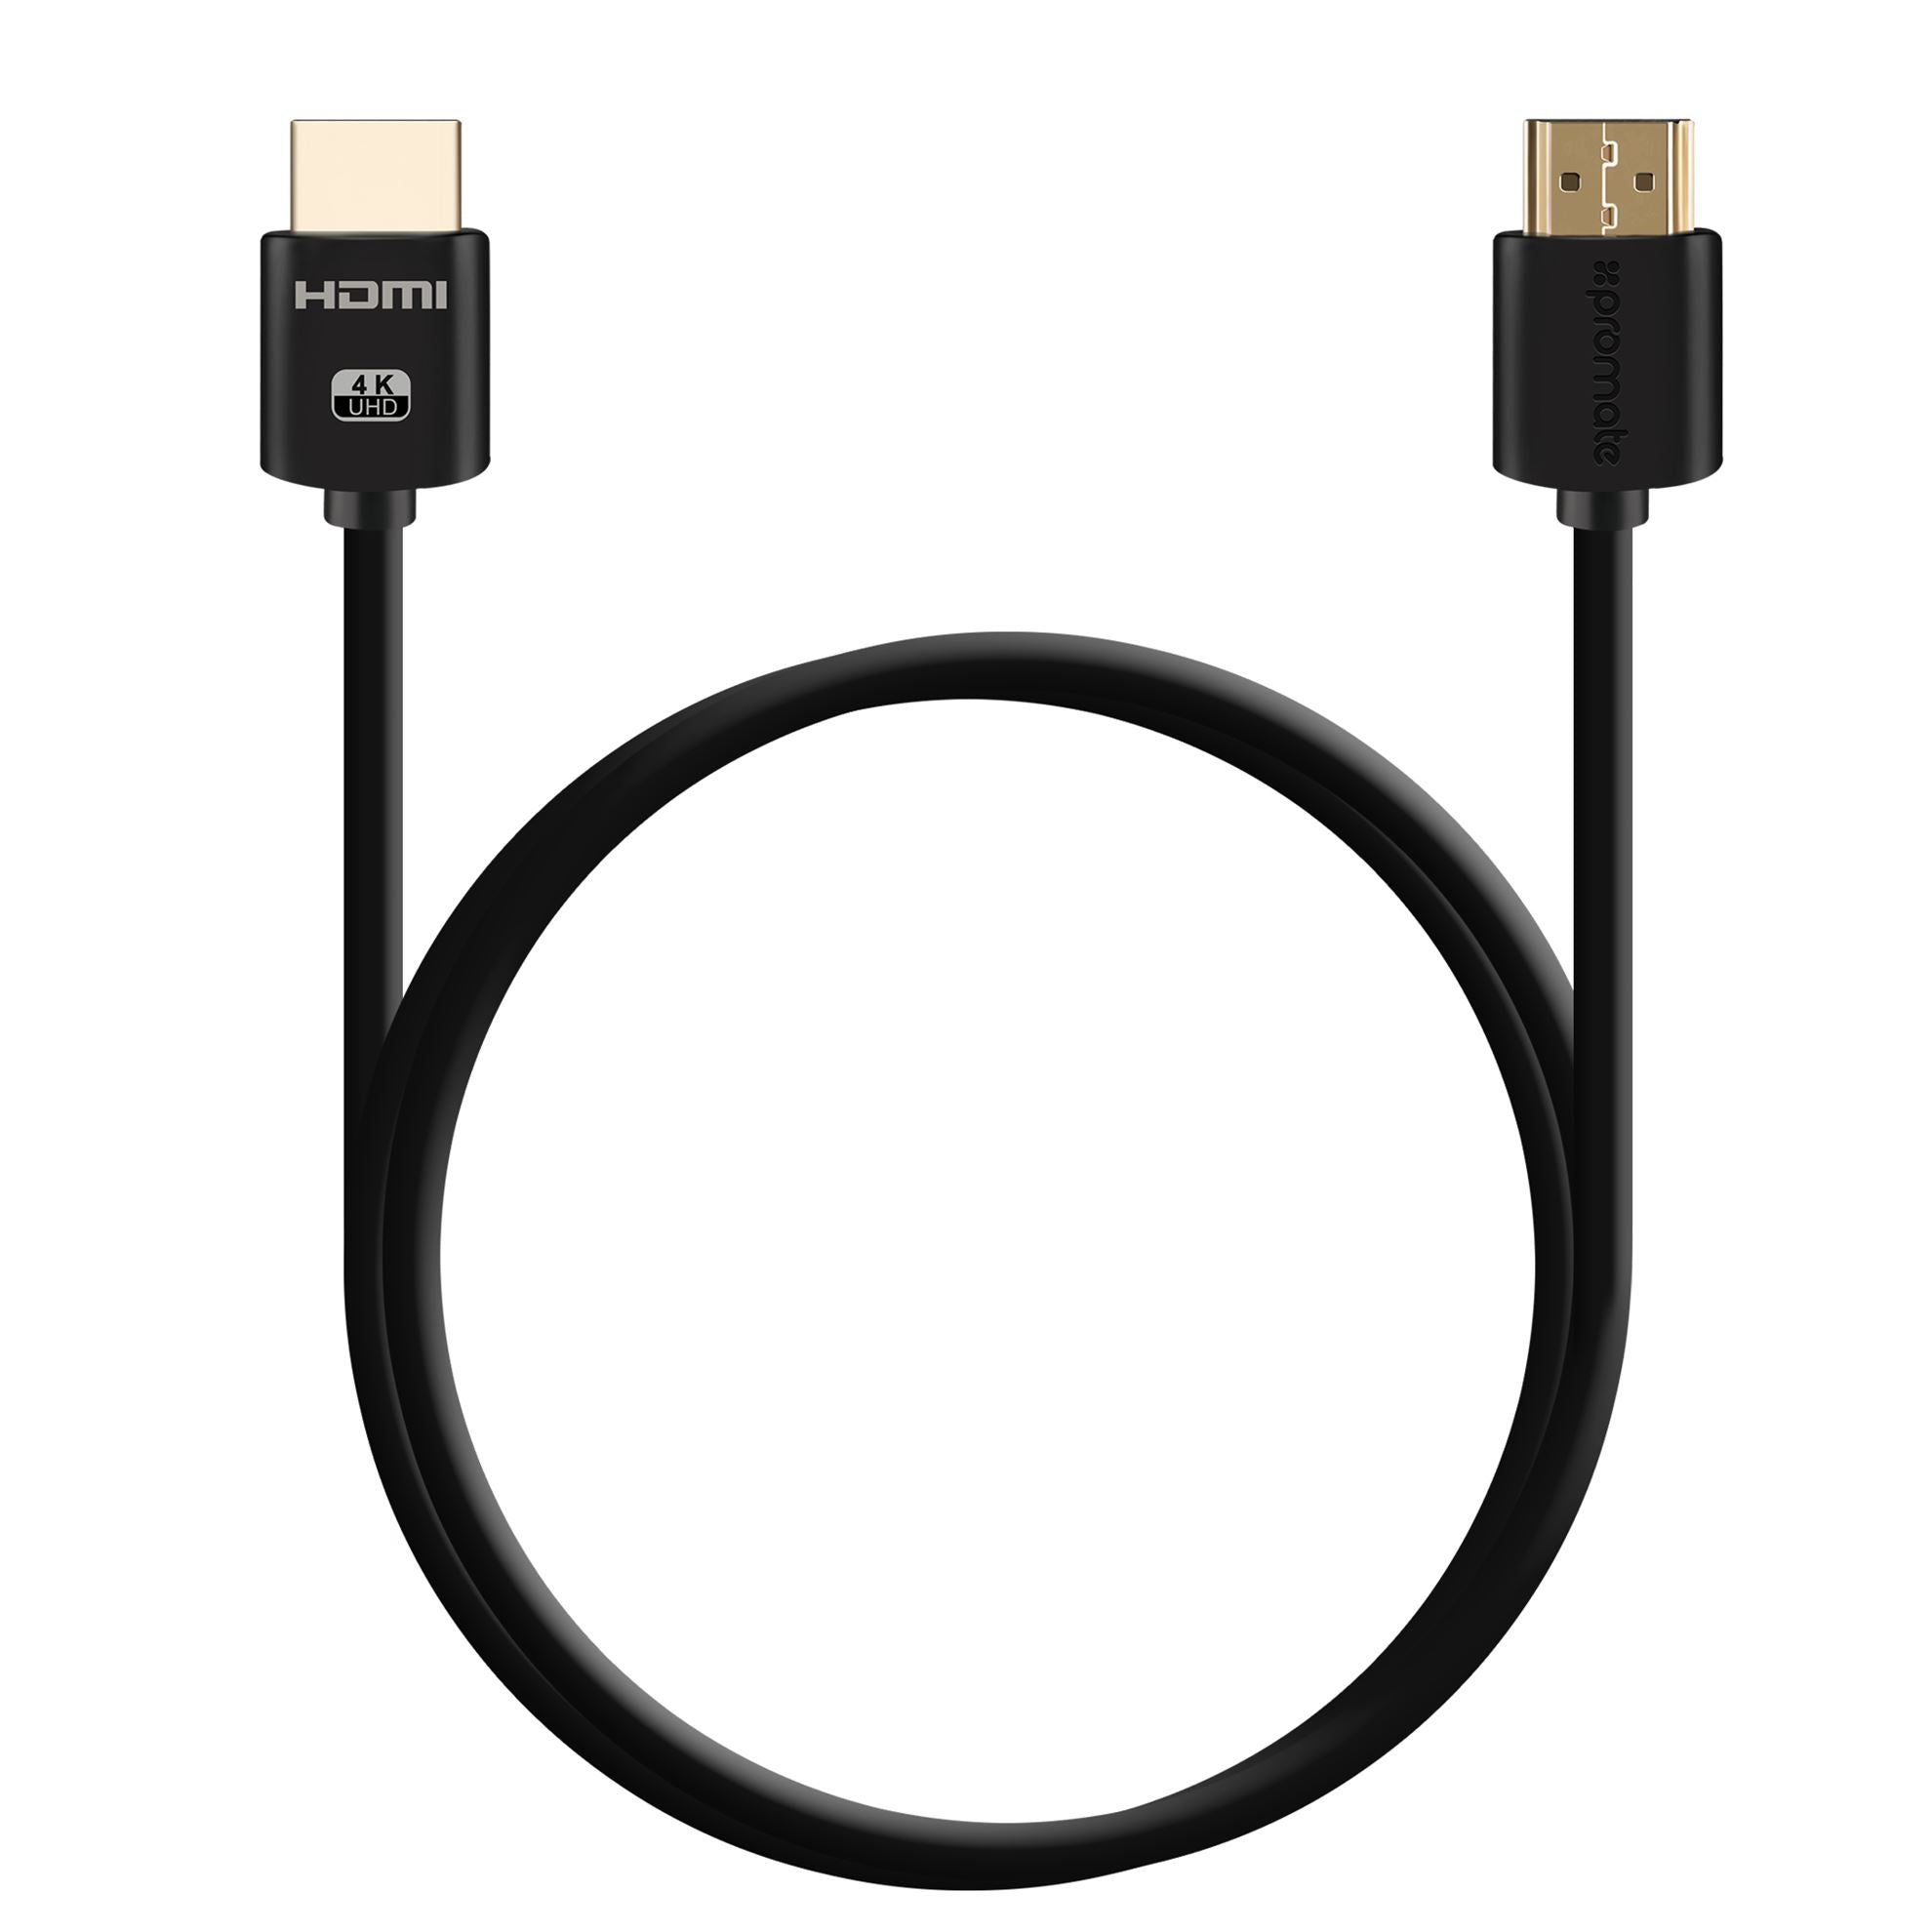 PROMATE_5m_4K_HDMI_cable._24K_Gold_Plated._High-Speed_Ethernet._3D_Support._Long_Bend_Lifespan._Max_Res_4K@60Hz_(4096X2160).Colour_Black 1700